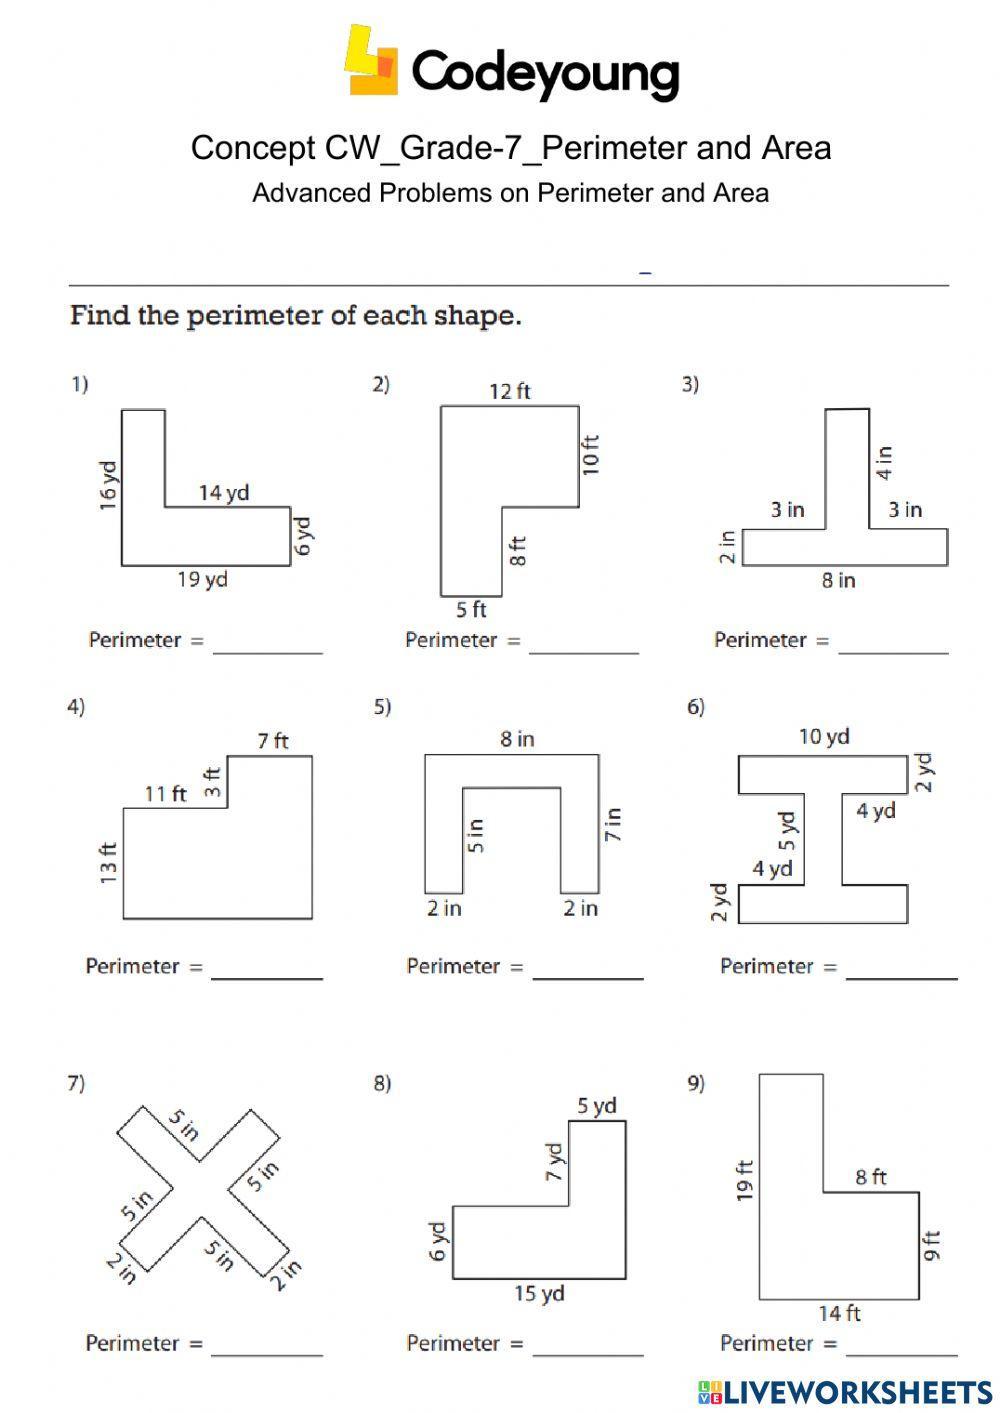 Advanced Problems on Perimeter and Area Concept CW worksheet | Live ...